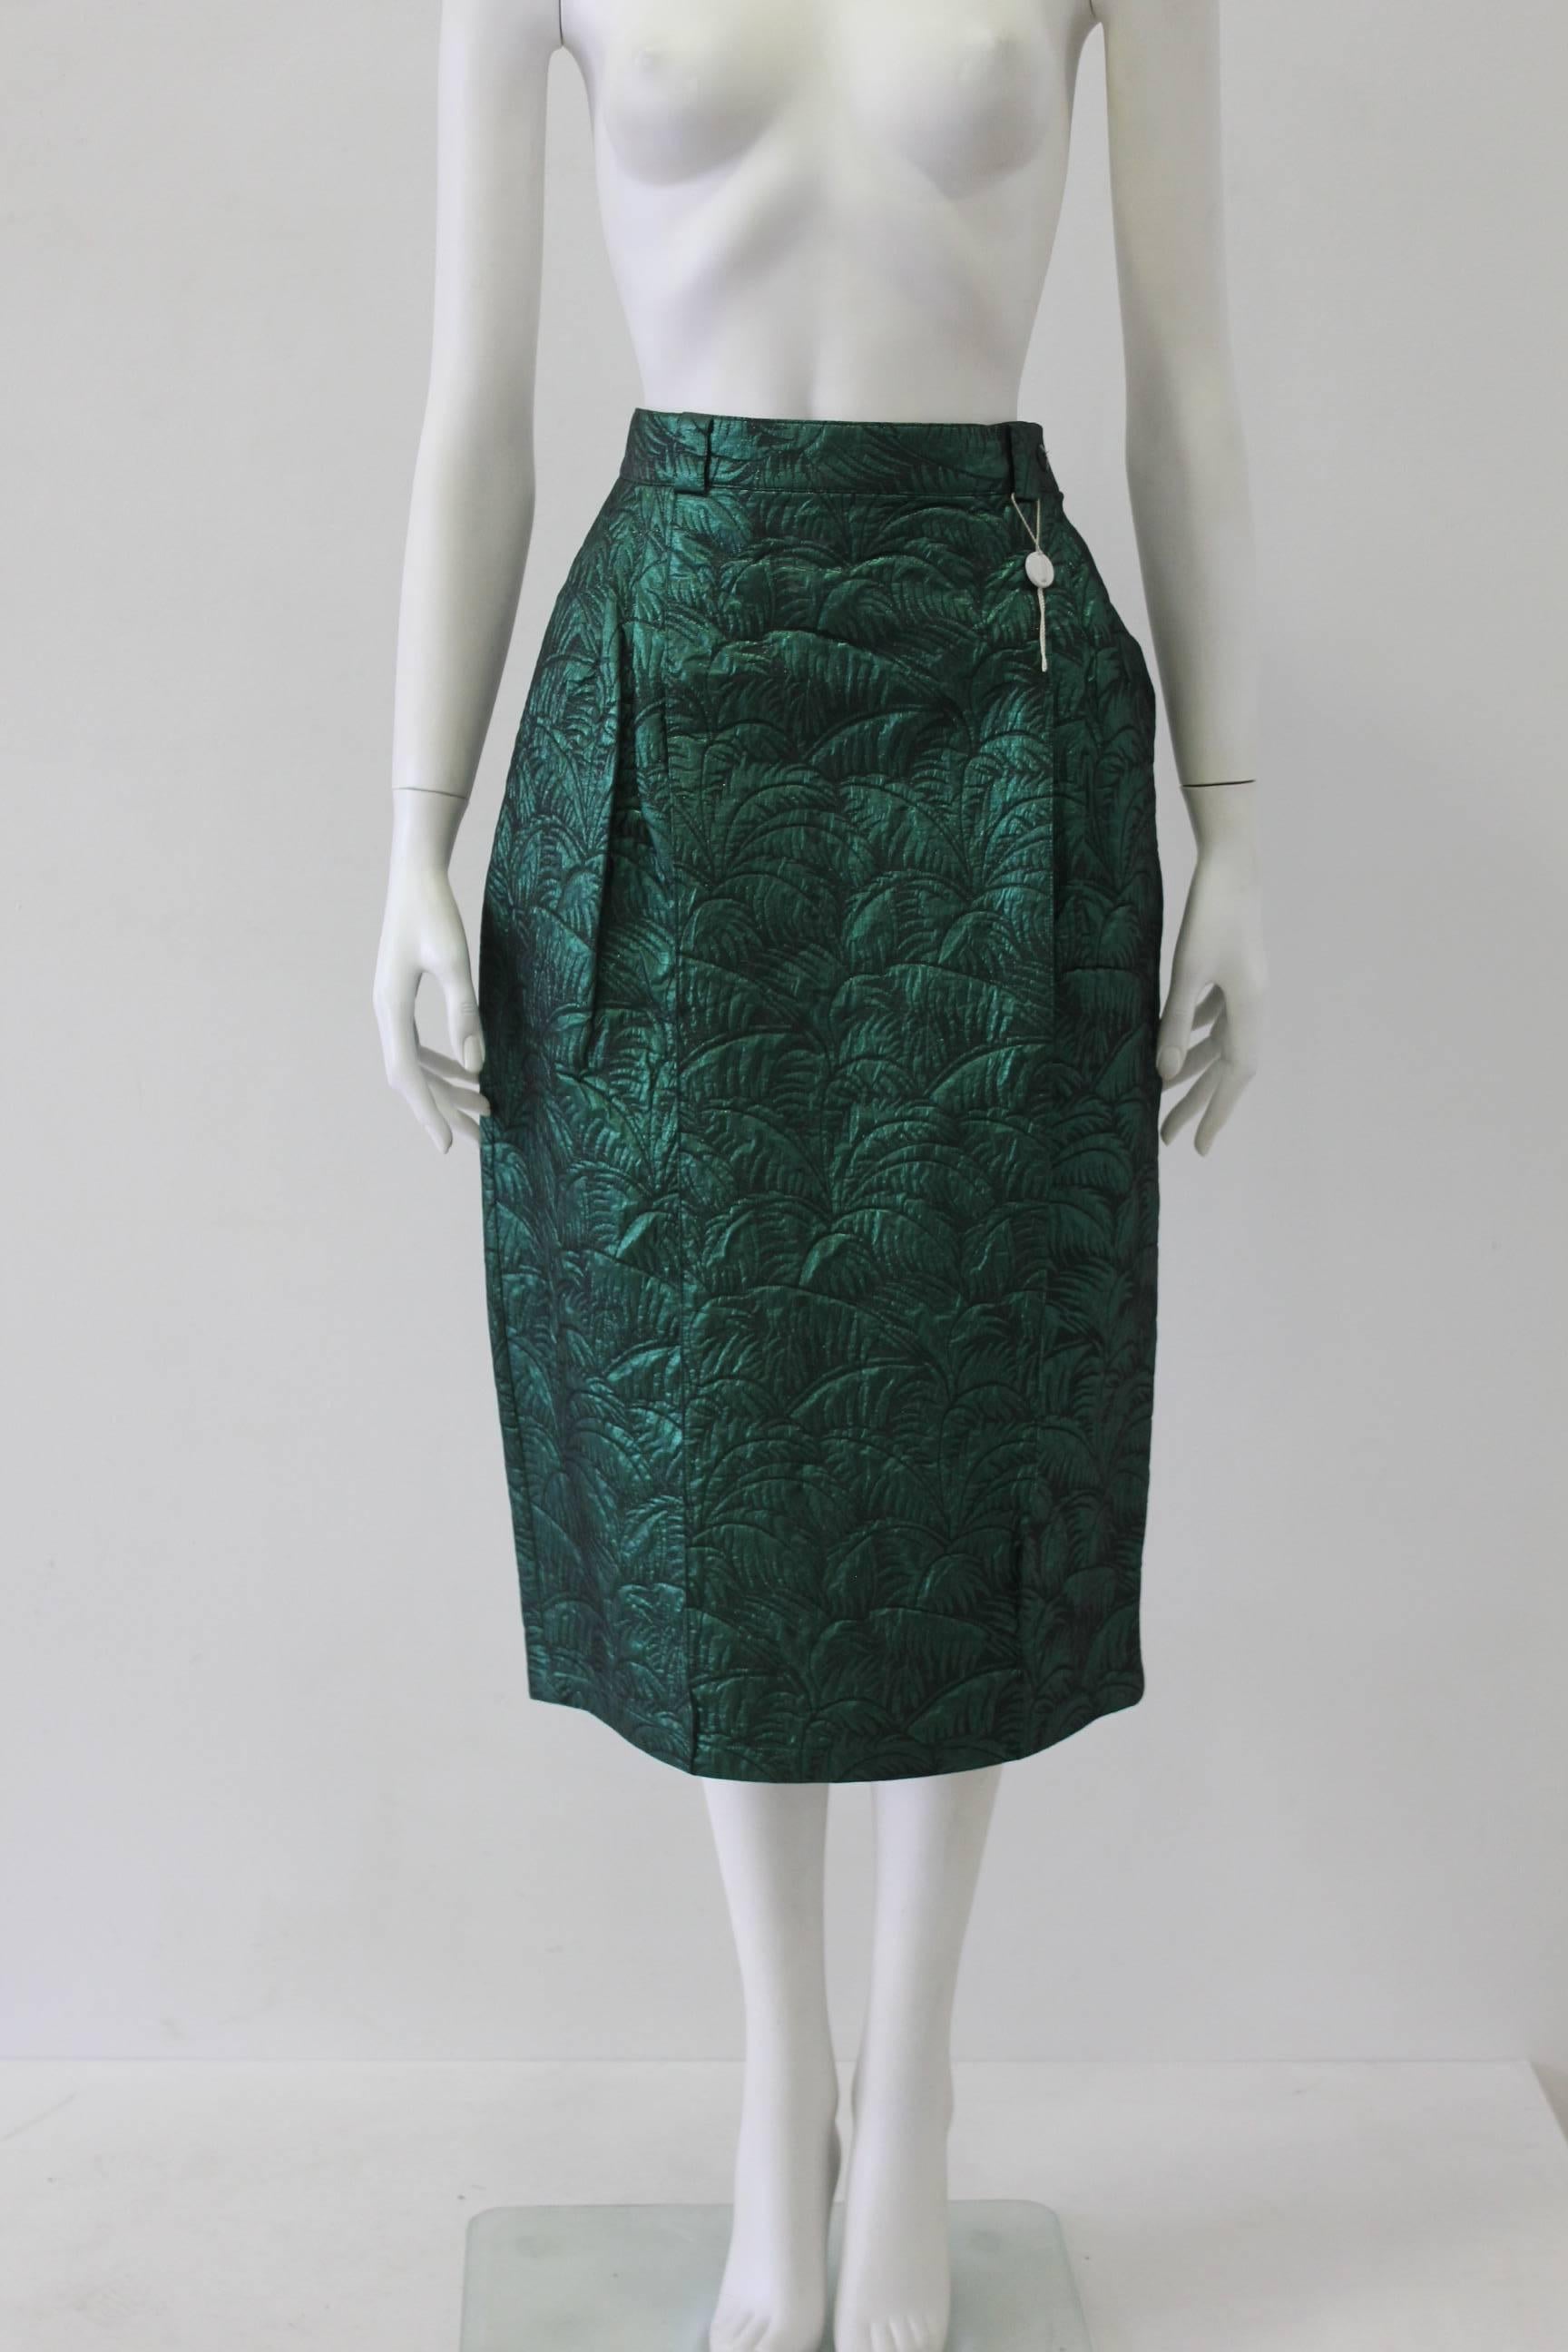 Impress With This Gianni Versace Brocade Lurex High Waist Skirt. Made From A Metallic Fabric Featuring A Beautiful Leaf Print. Paired With A Plain Top And Statement Necklace To Really Let It Shine.